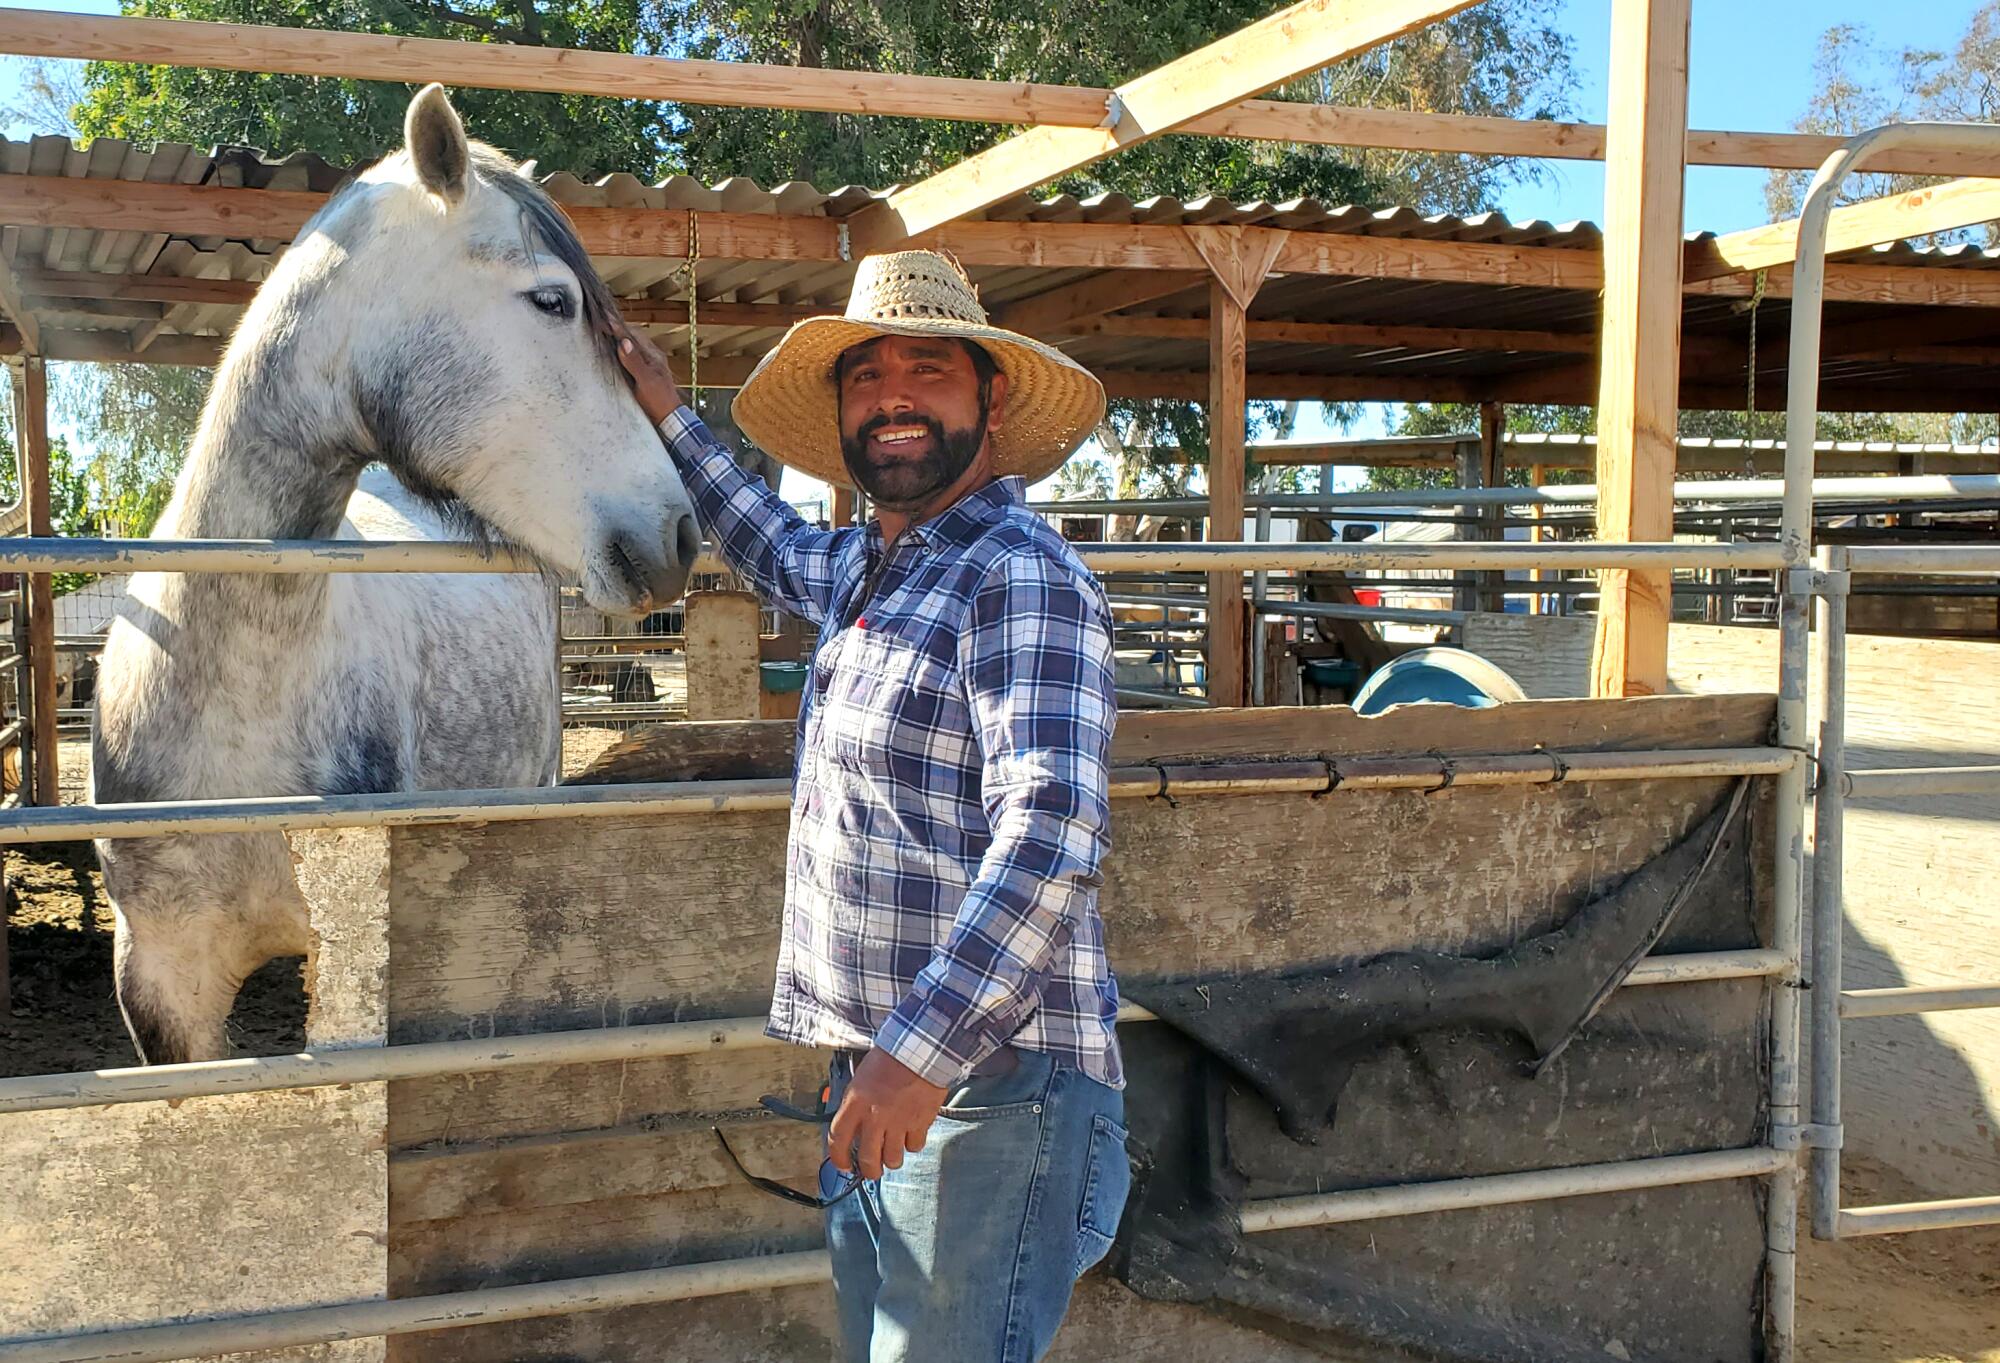 A man in a straw hat pets a white and gray horse.